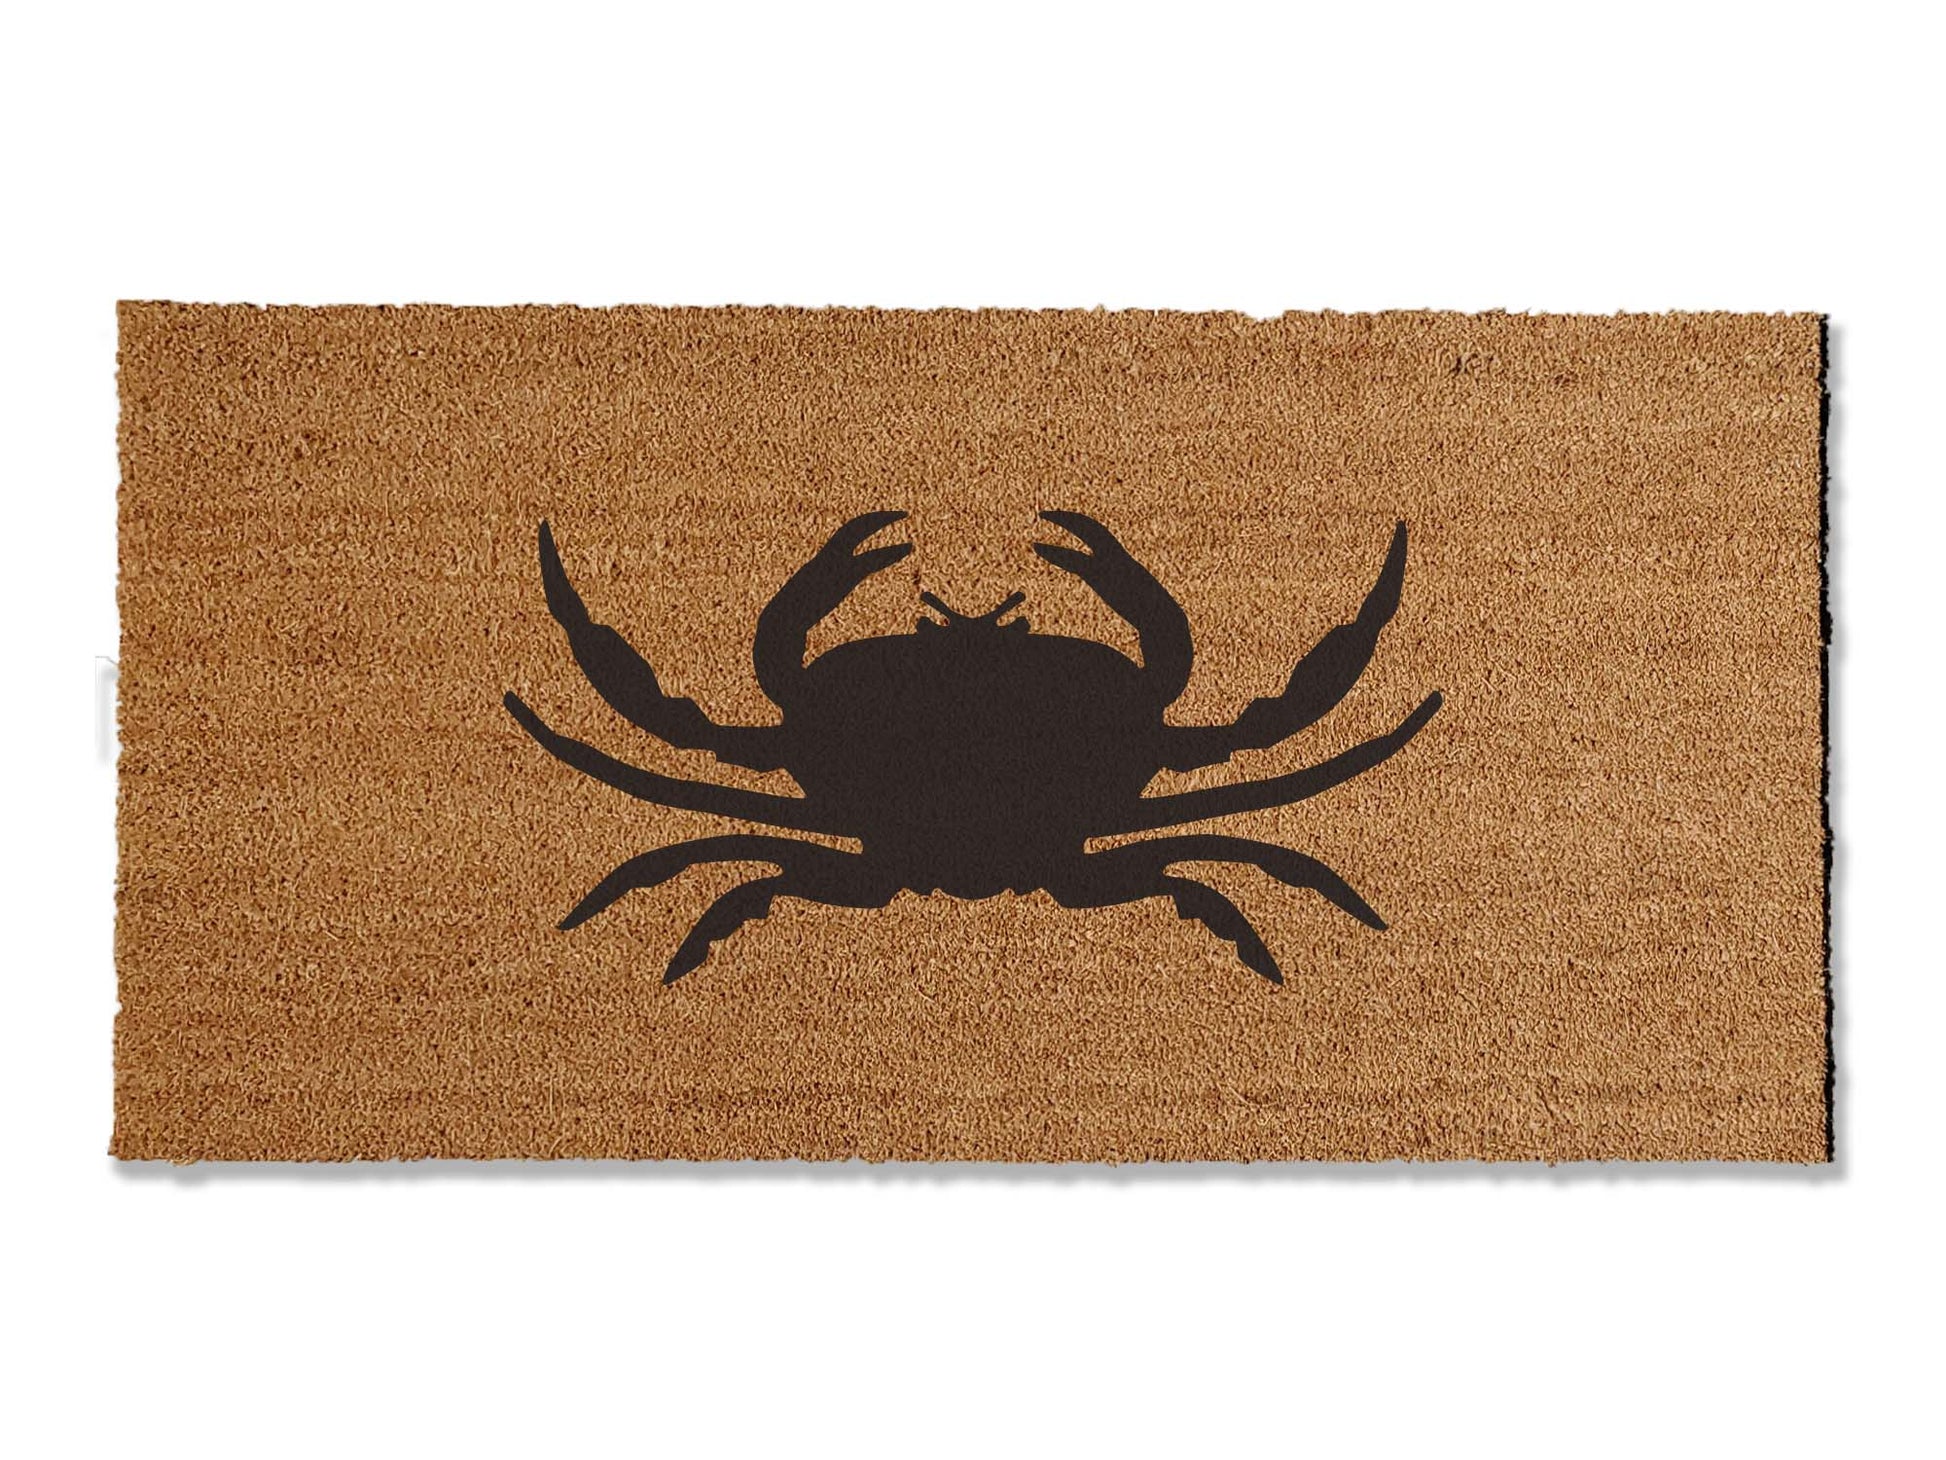 Transform your entryway with our versatile coir welcome doormat adorned with a crab design. Available in multiple sizes, this coastal-inspired mat is a perfect addition to your beach house, bringing a touch of seaside charm that spruces up your home's entrance.